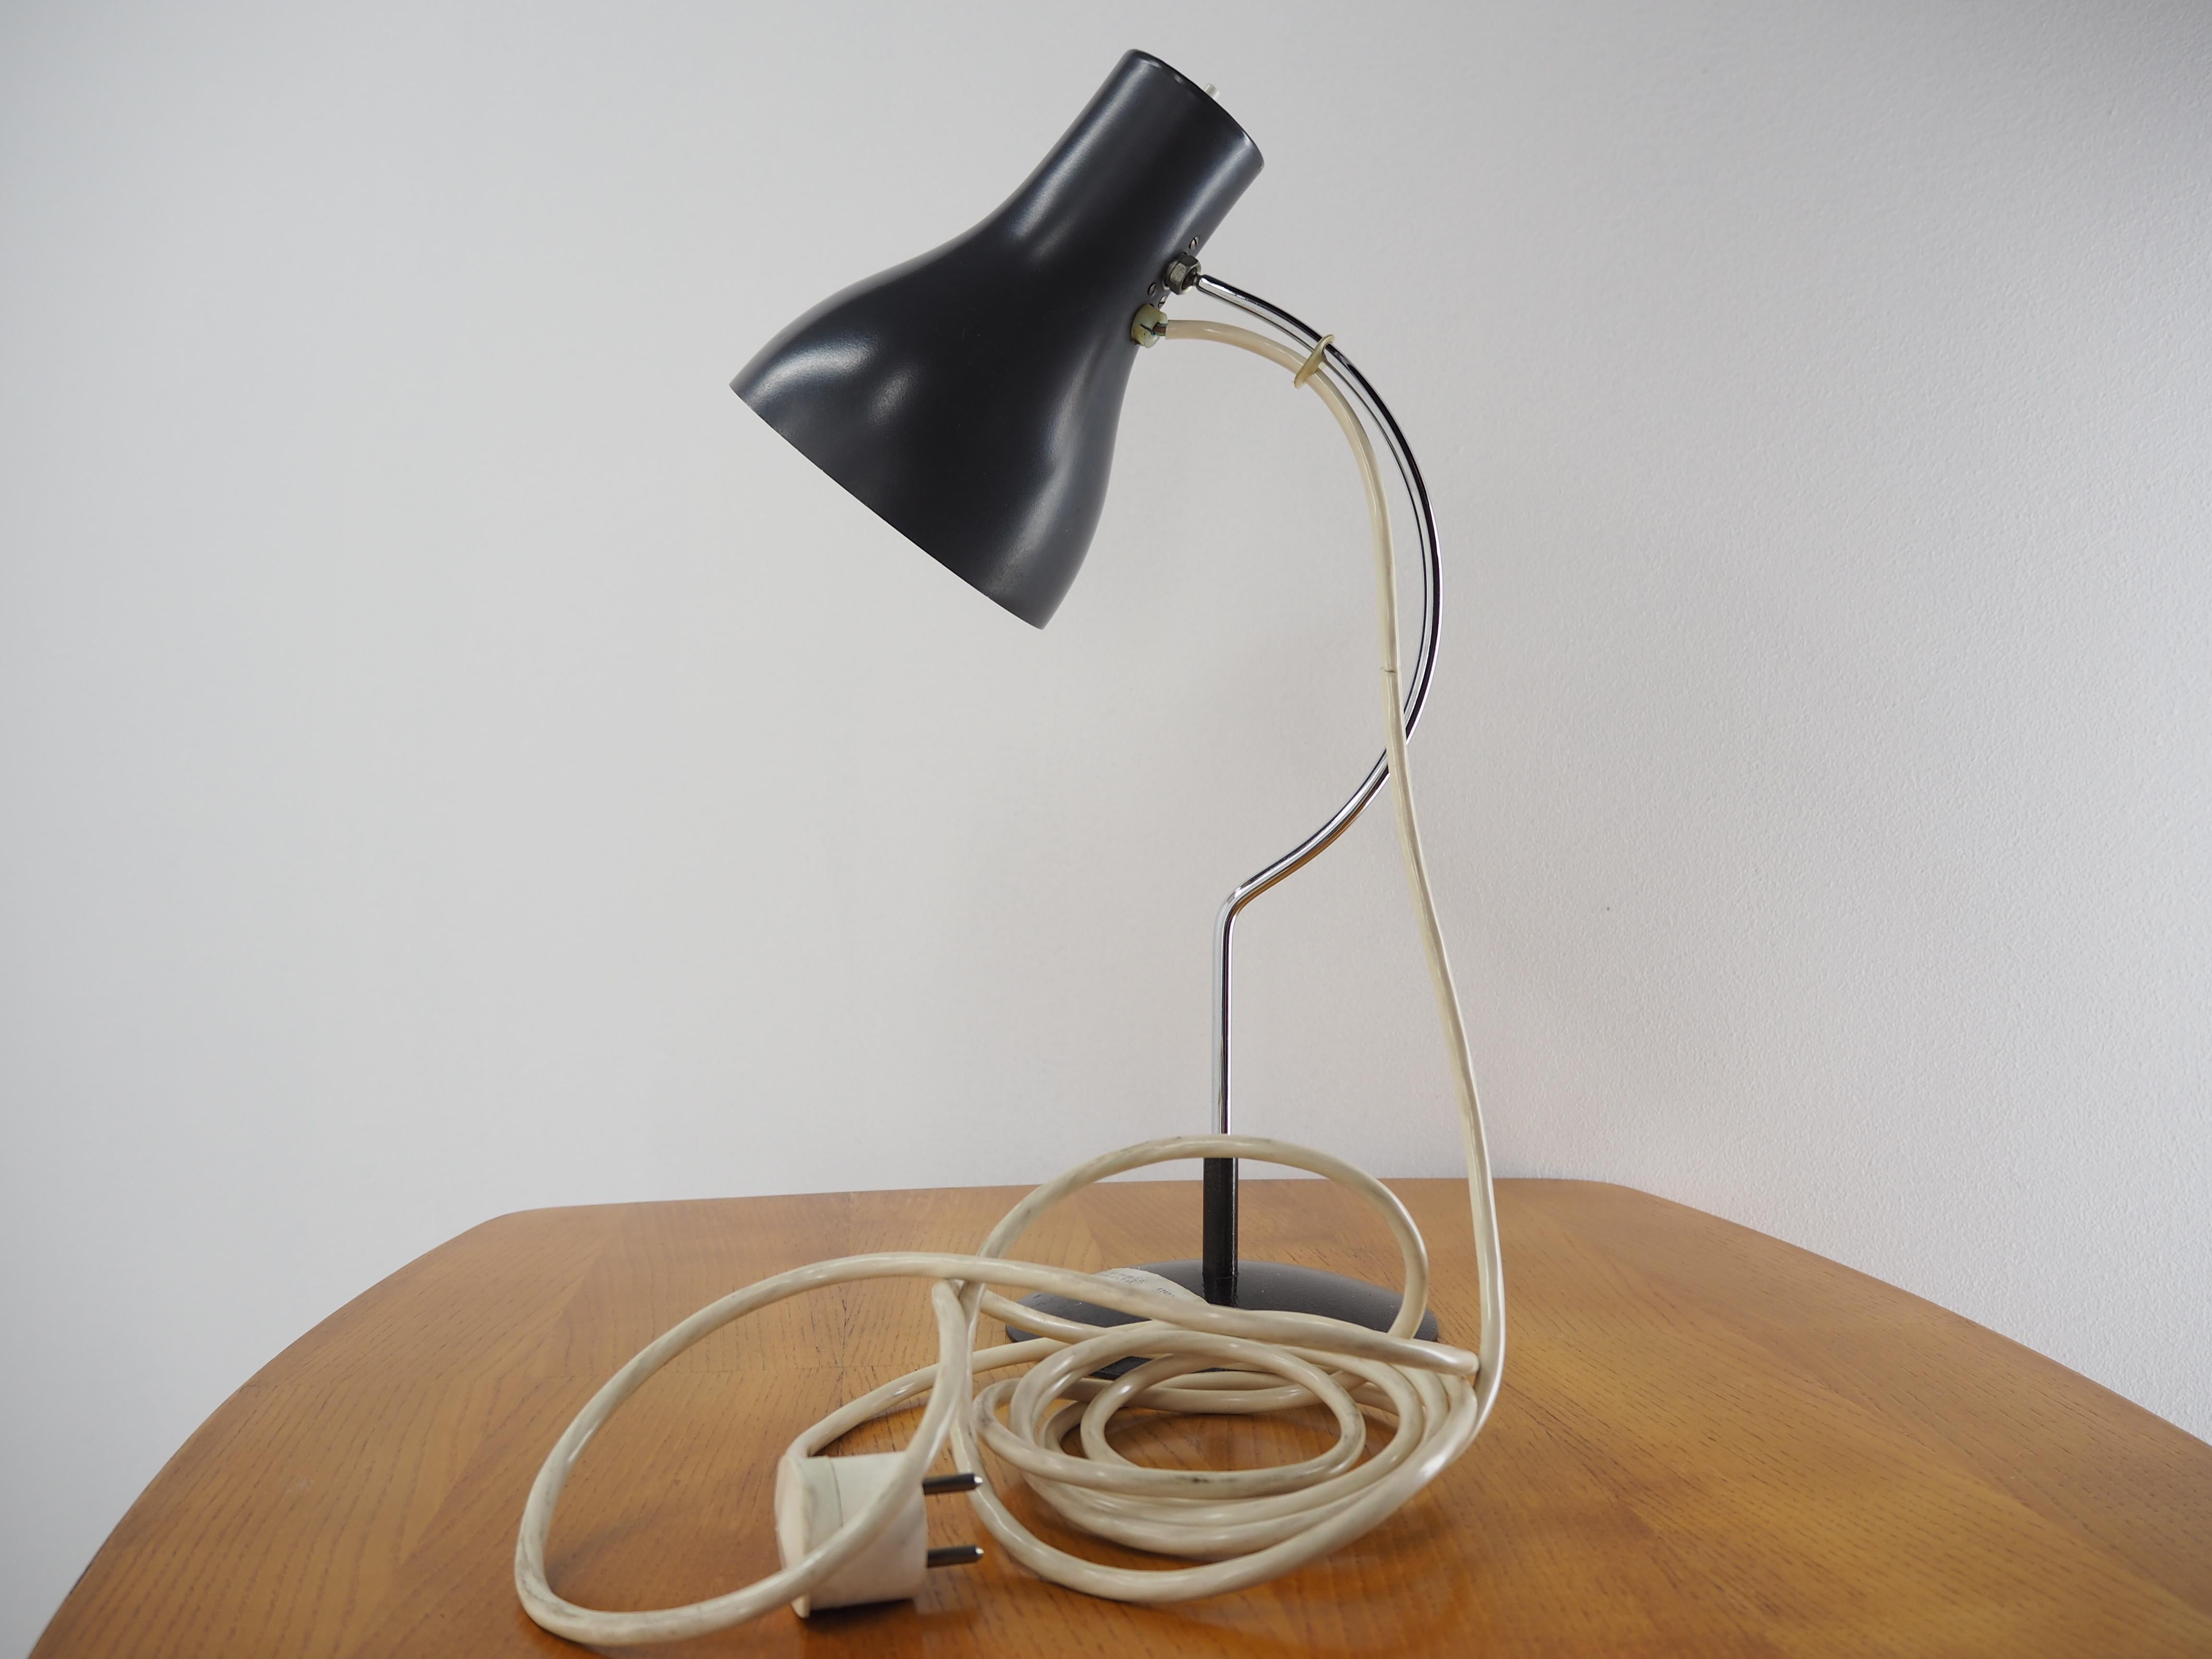 Midcentury Table Lamp Designed by J. Hurka for Napako 1970s Type 0521 1